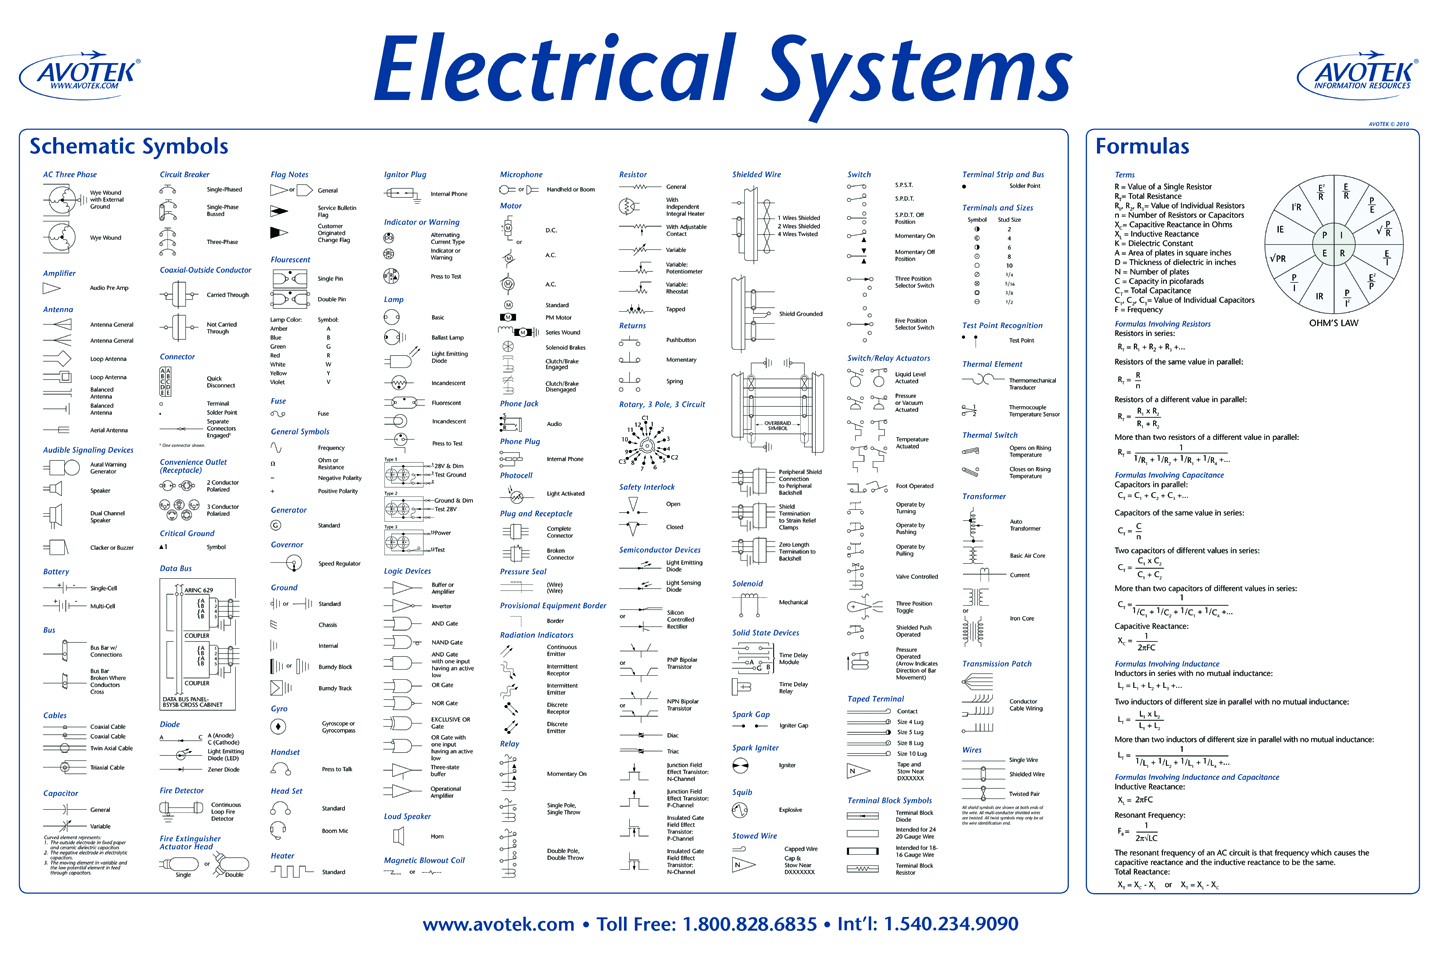 Electrical Equation Chart